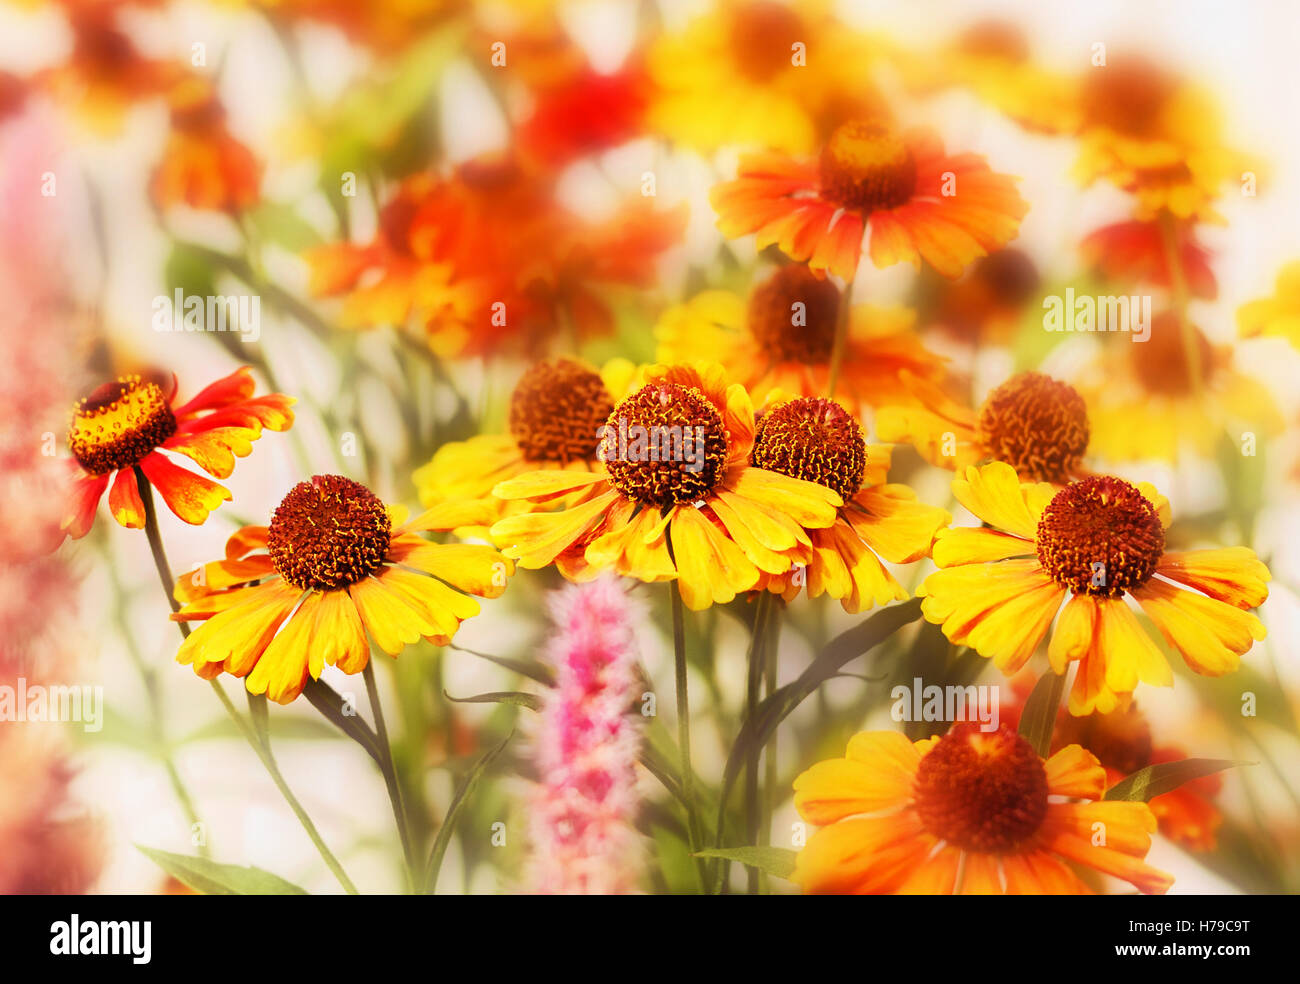 Nice fall red flowers of helenium in garden Stock Photo